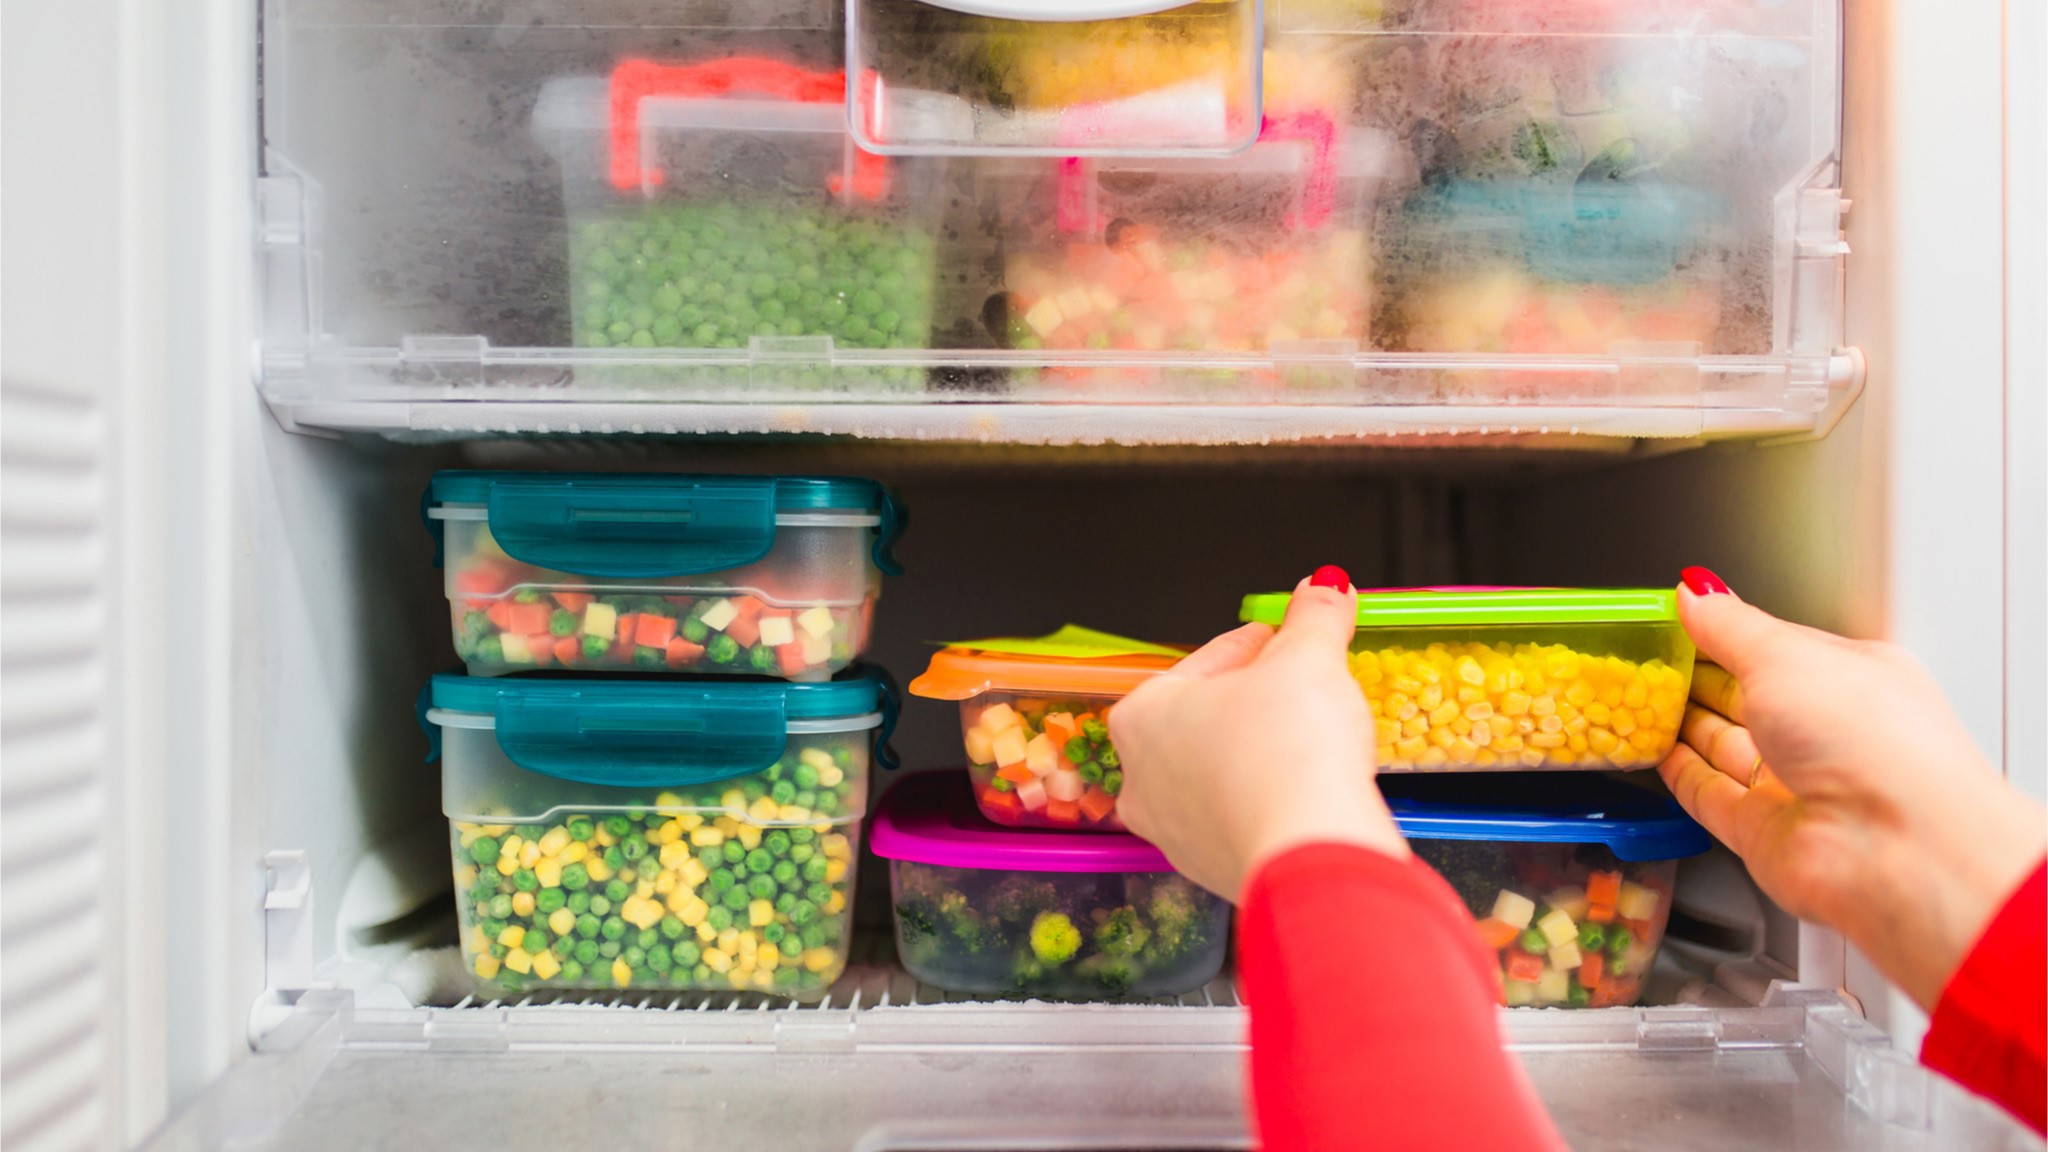 Inappropriate Areas For Storing Food: A Guide To Proper Food Storage